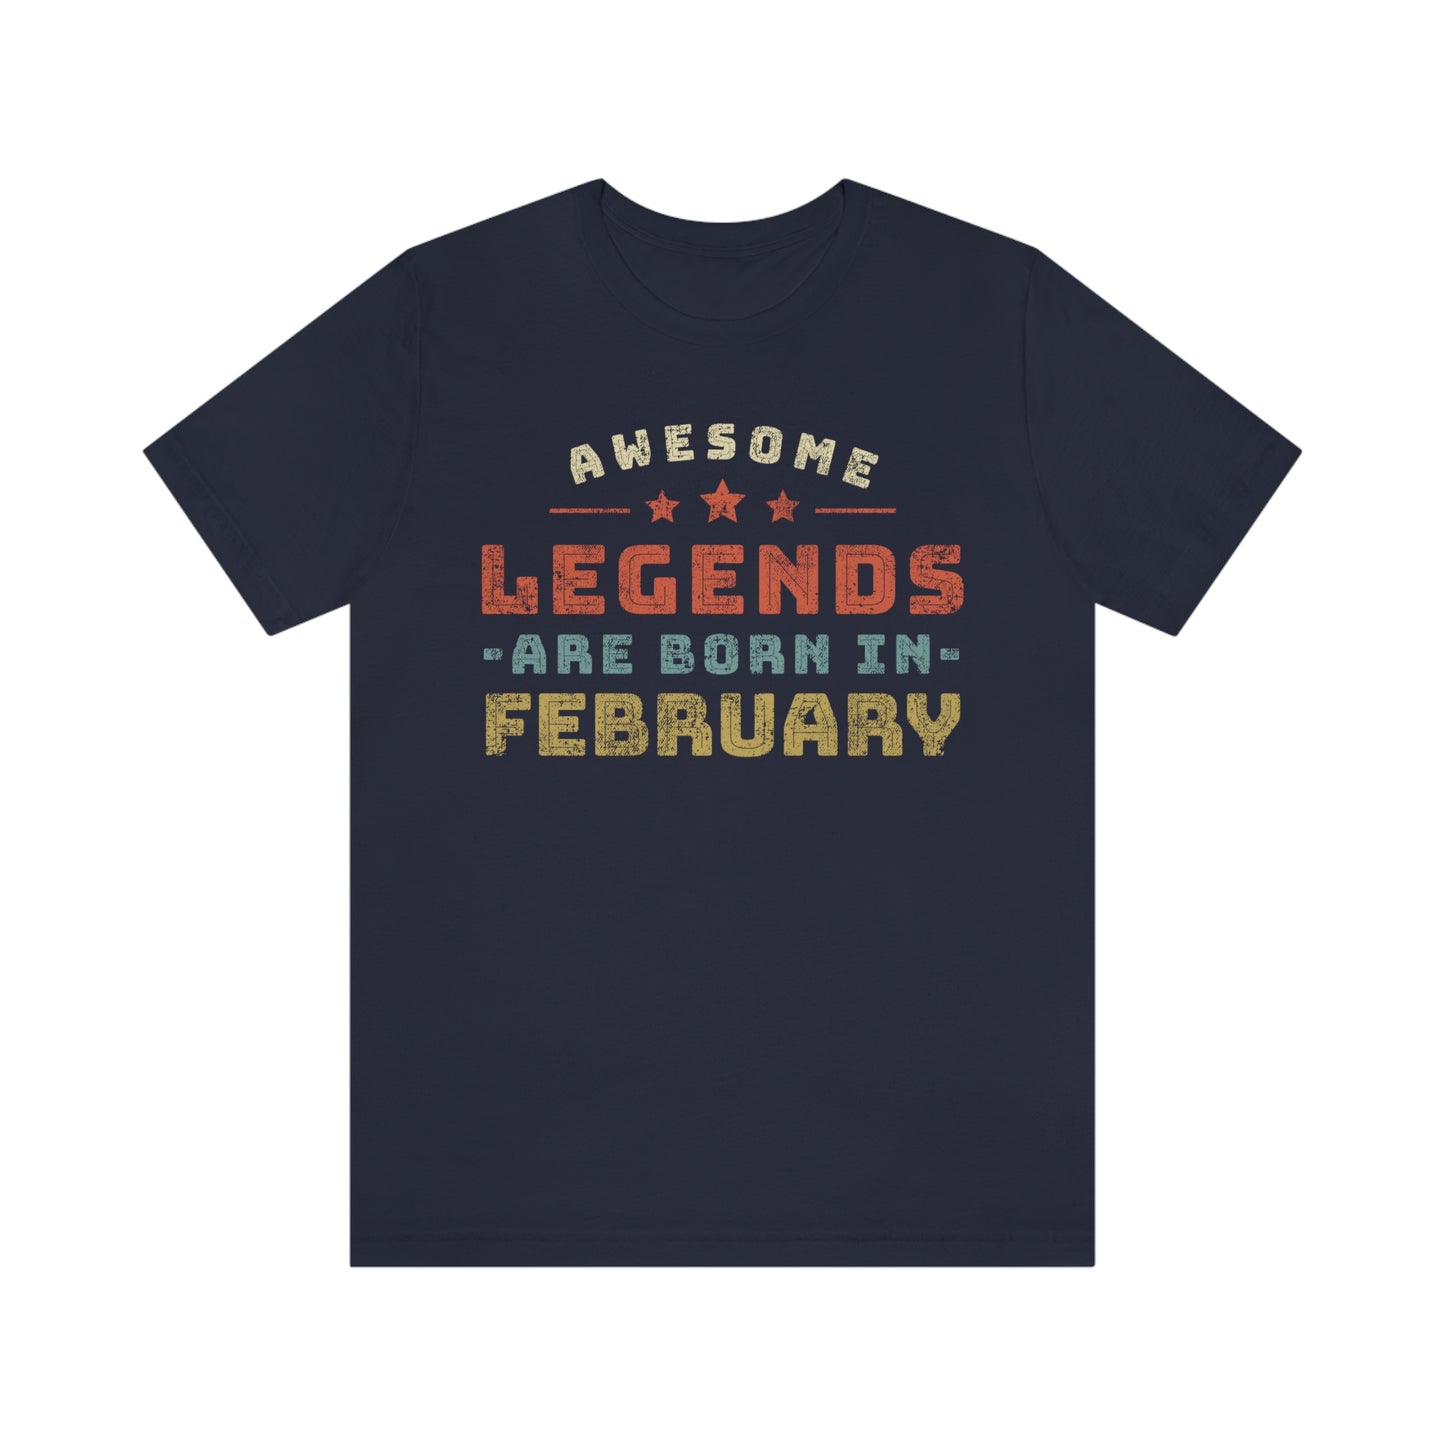 Awesome Legends are born in February, Birthday gifts for women or men - 37 Design Unit